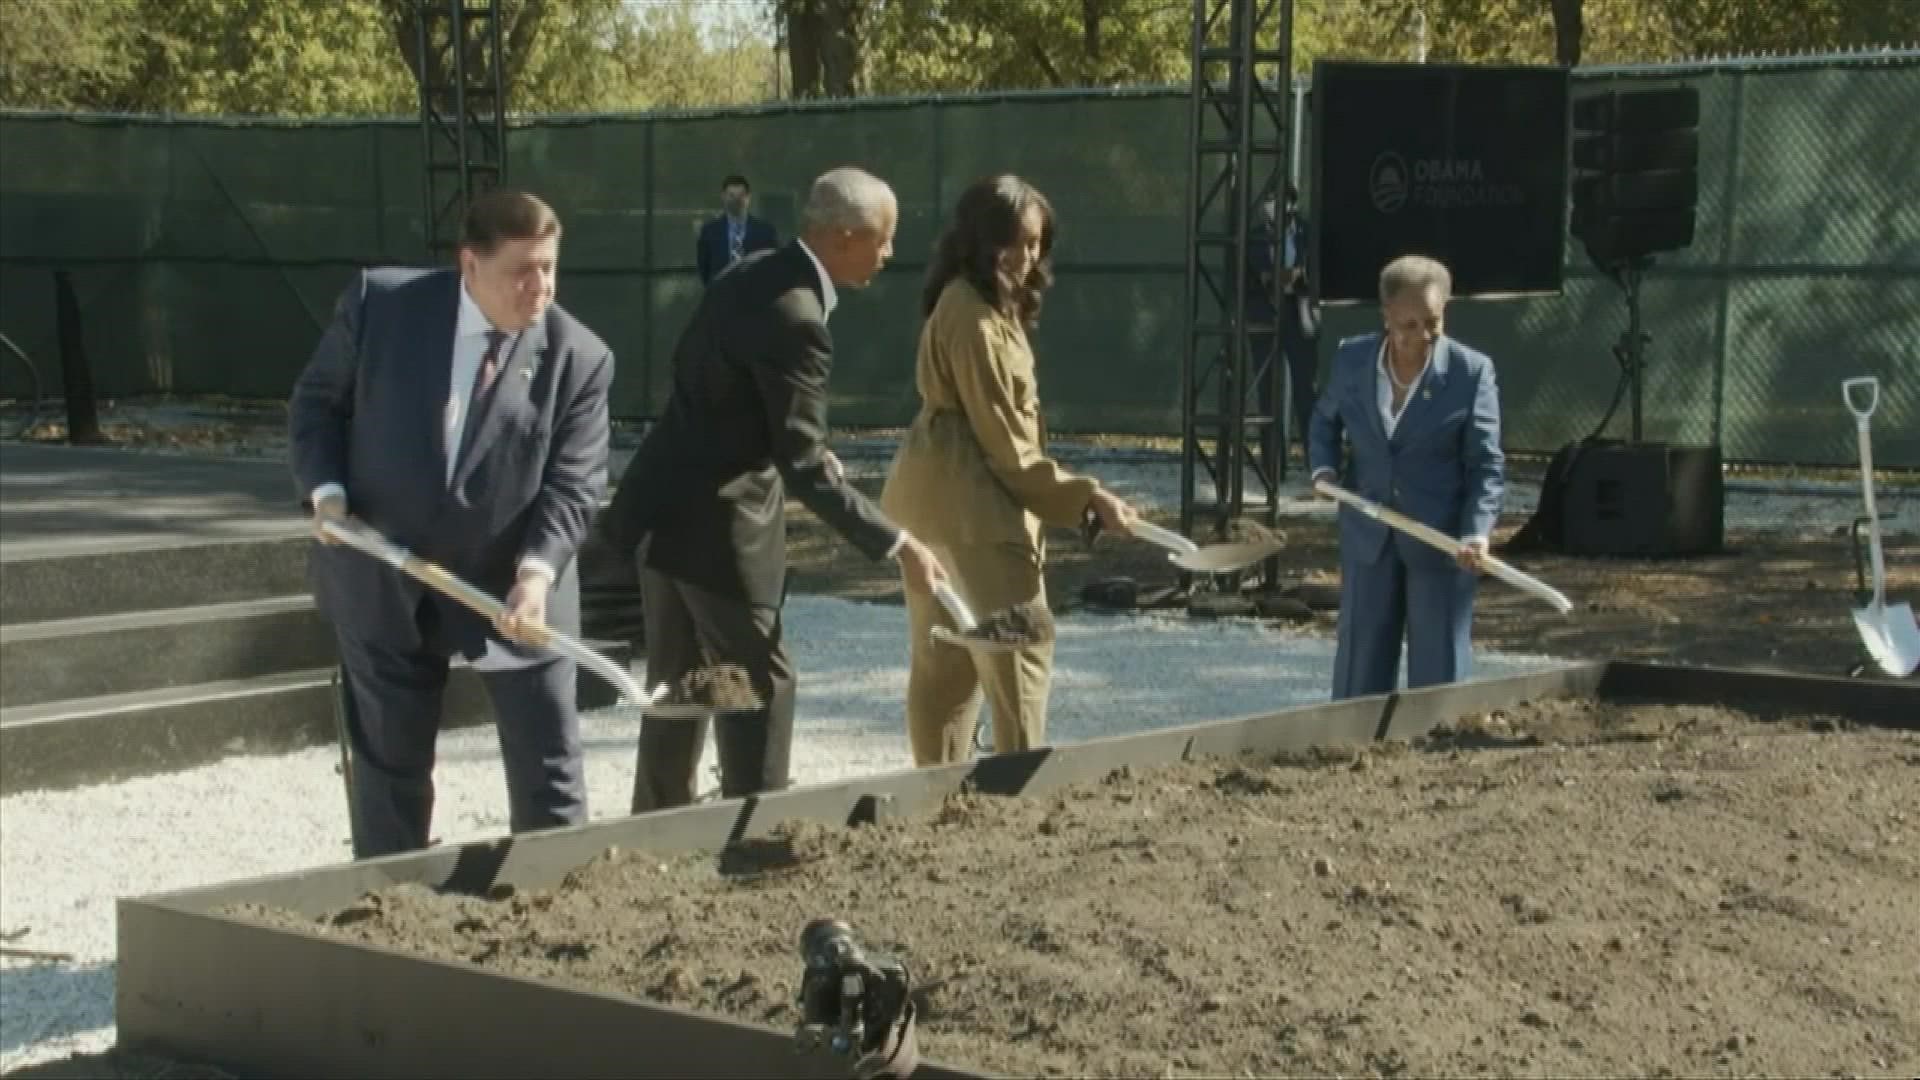 Gov. Pritzker and the Obamas attended a celebratory groundbreaking Tuesday on Chicago's South Side for the Obama Presidential Center.